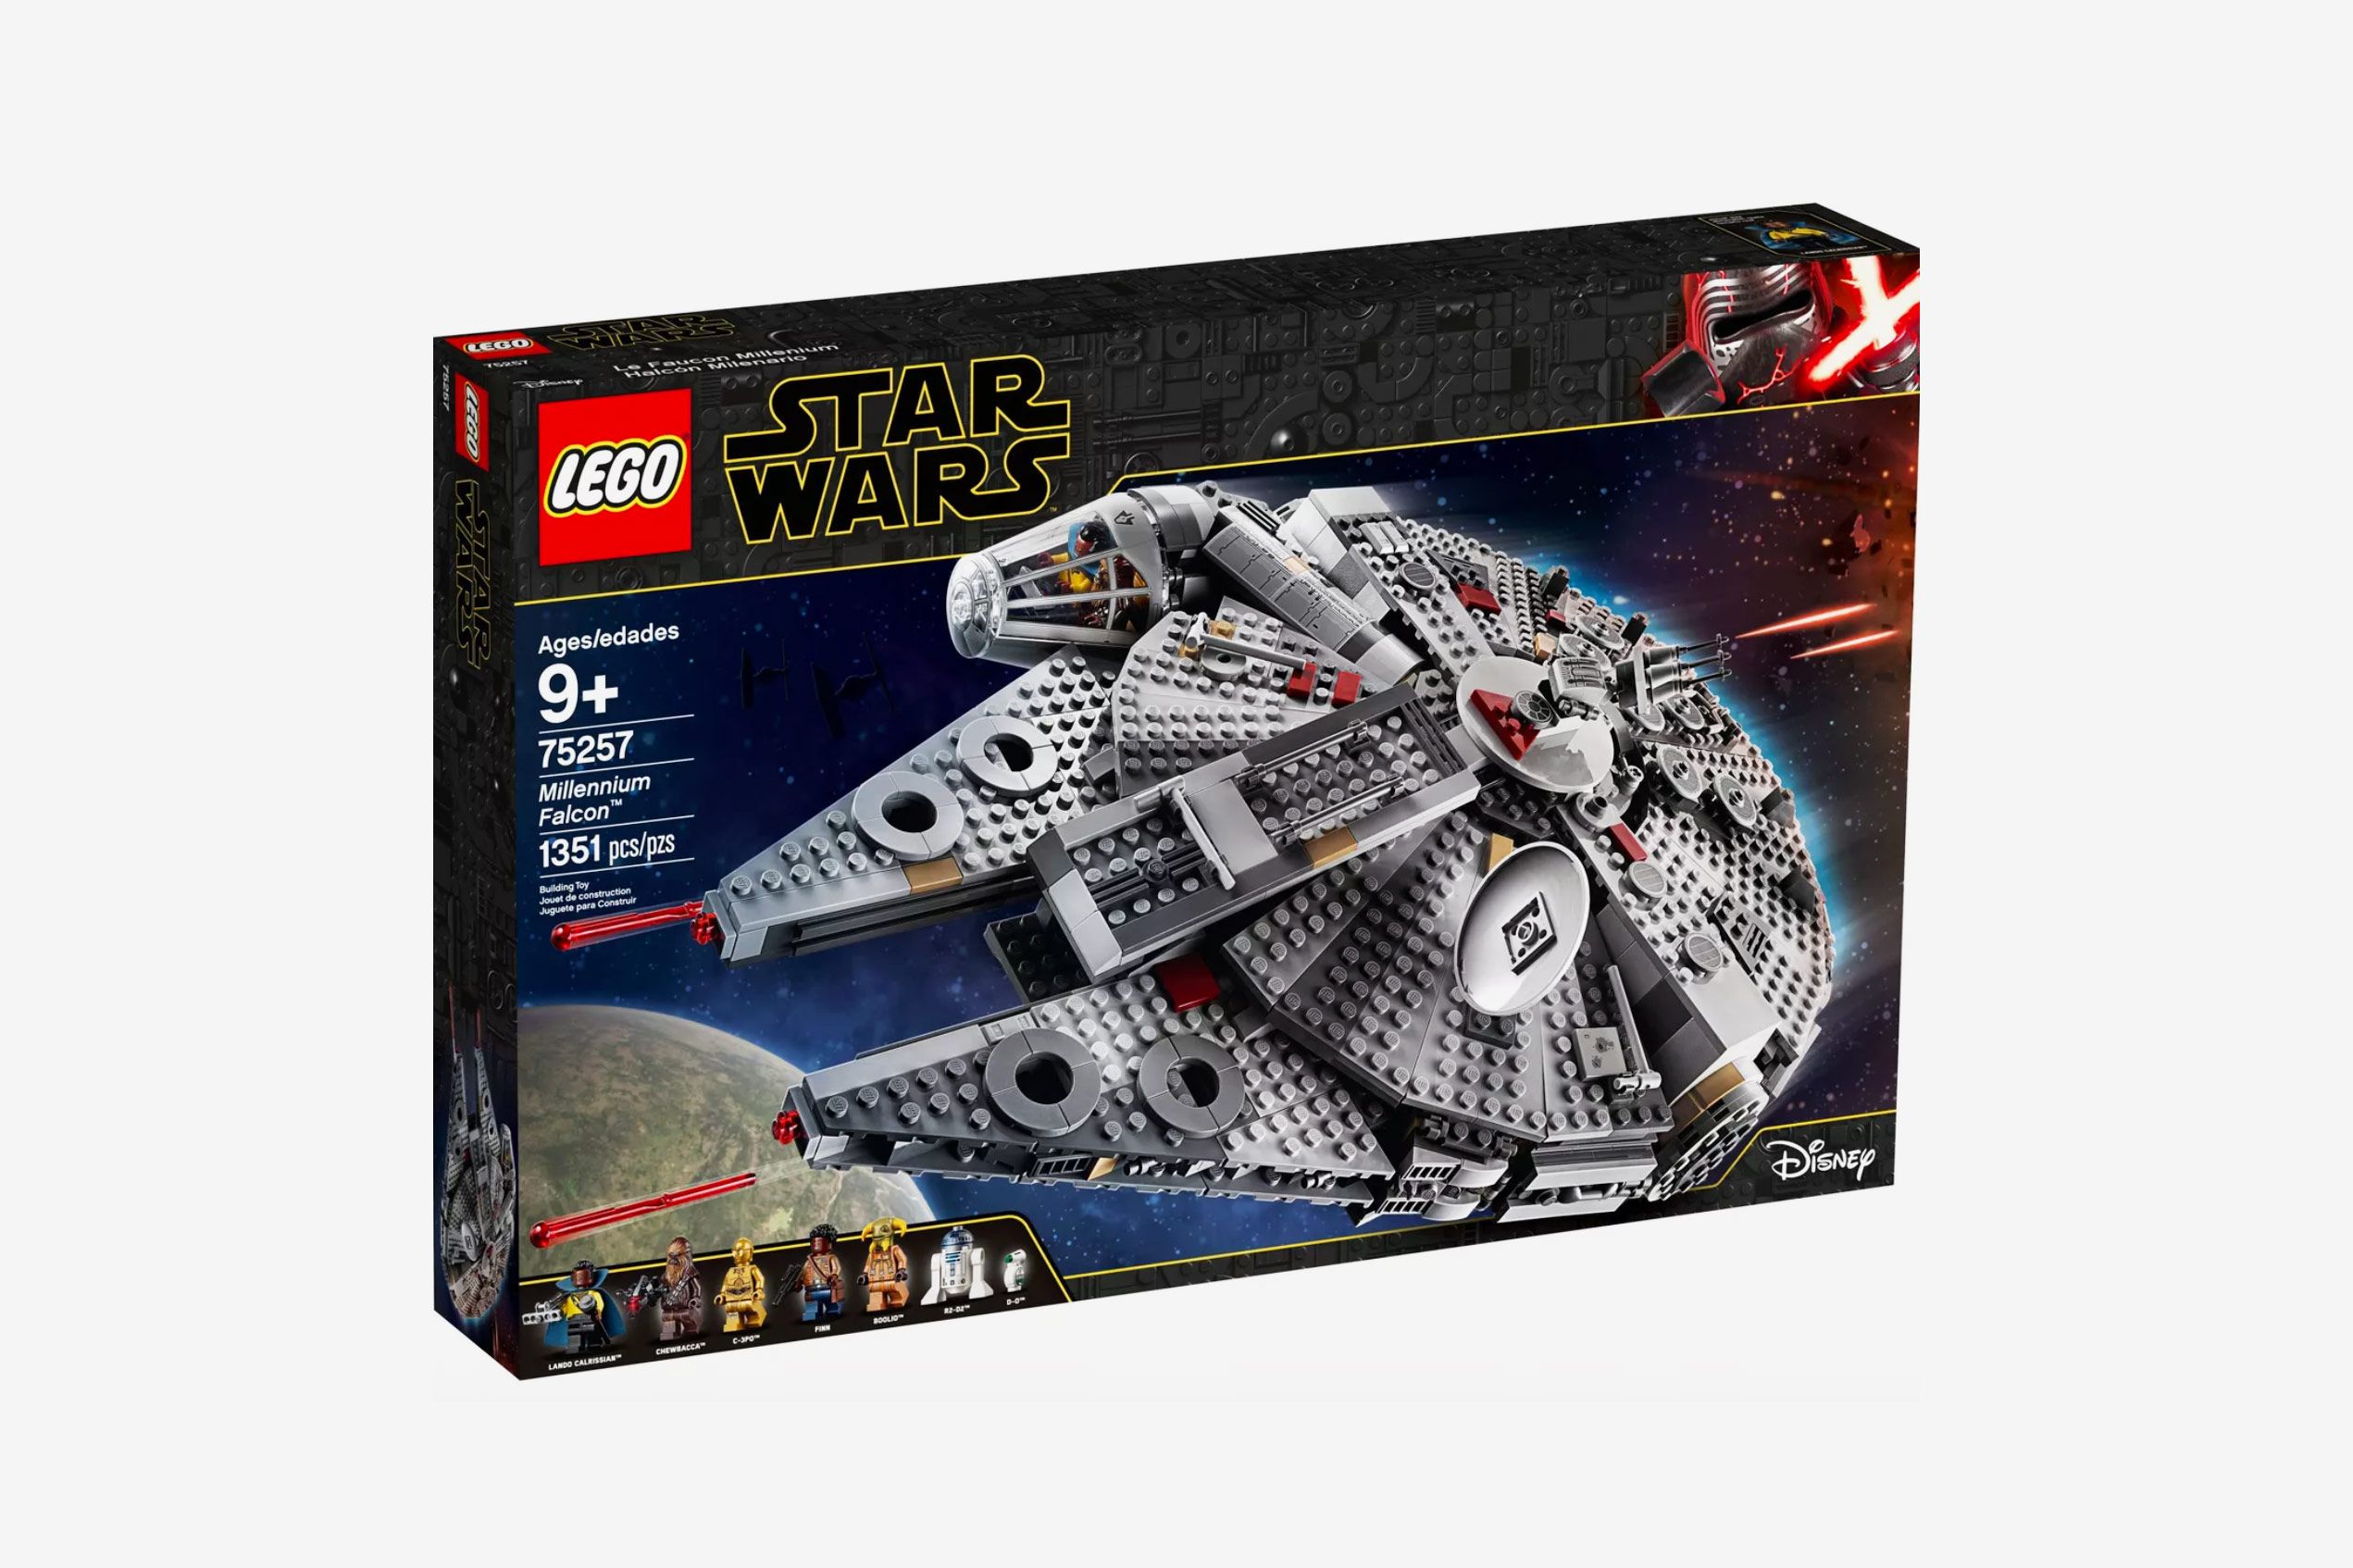 Star Wars Gift Guide For Ultimate Fans